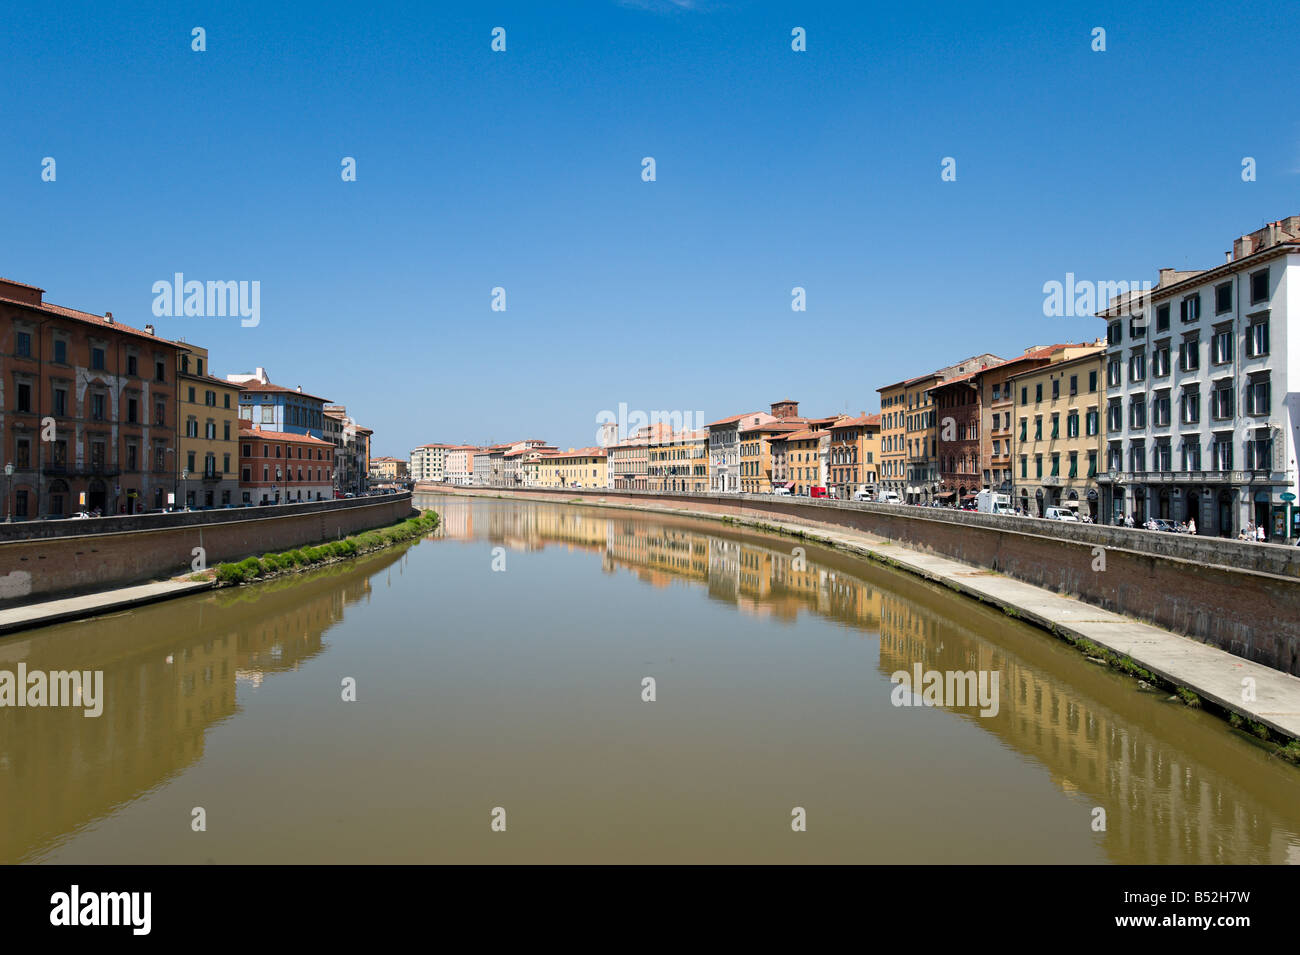 View of the River Arno from the Ponte di Mezzo in the old town, Pisa, Tuscany, Italy Stock Photo